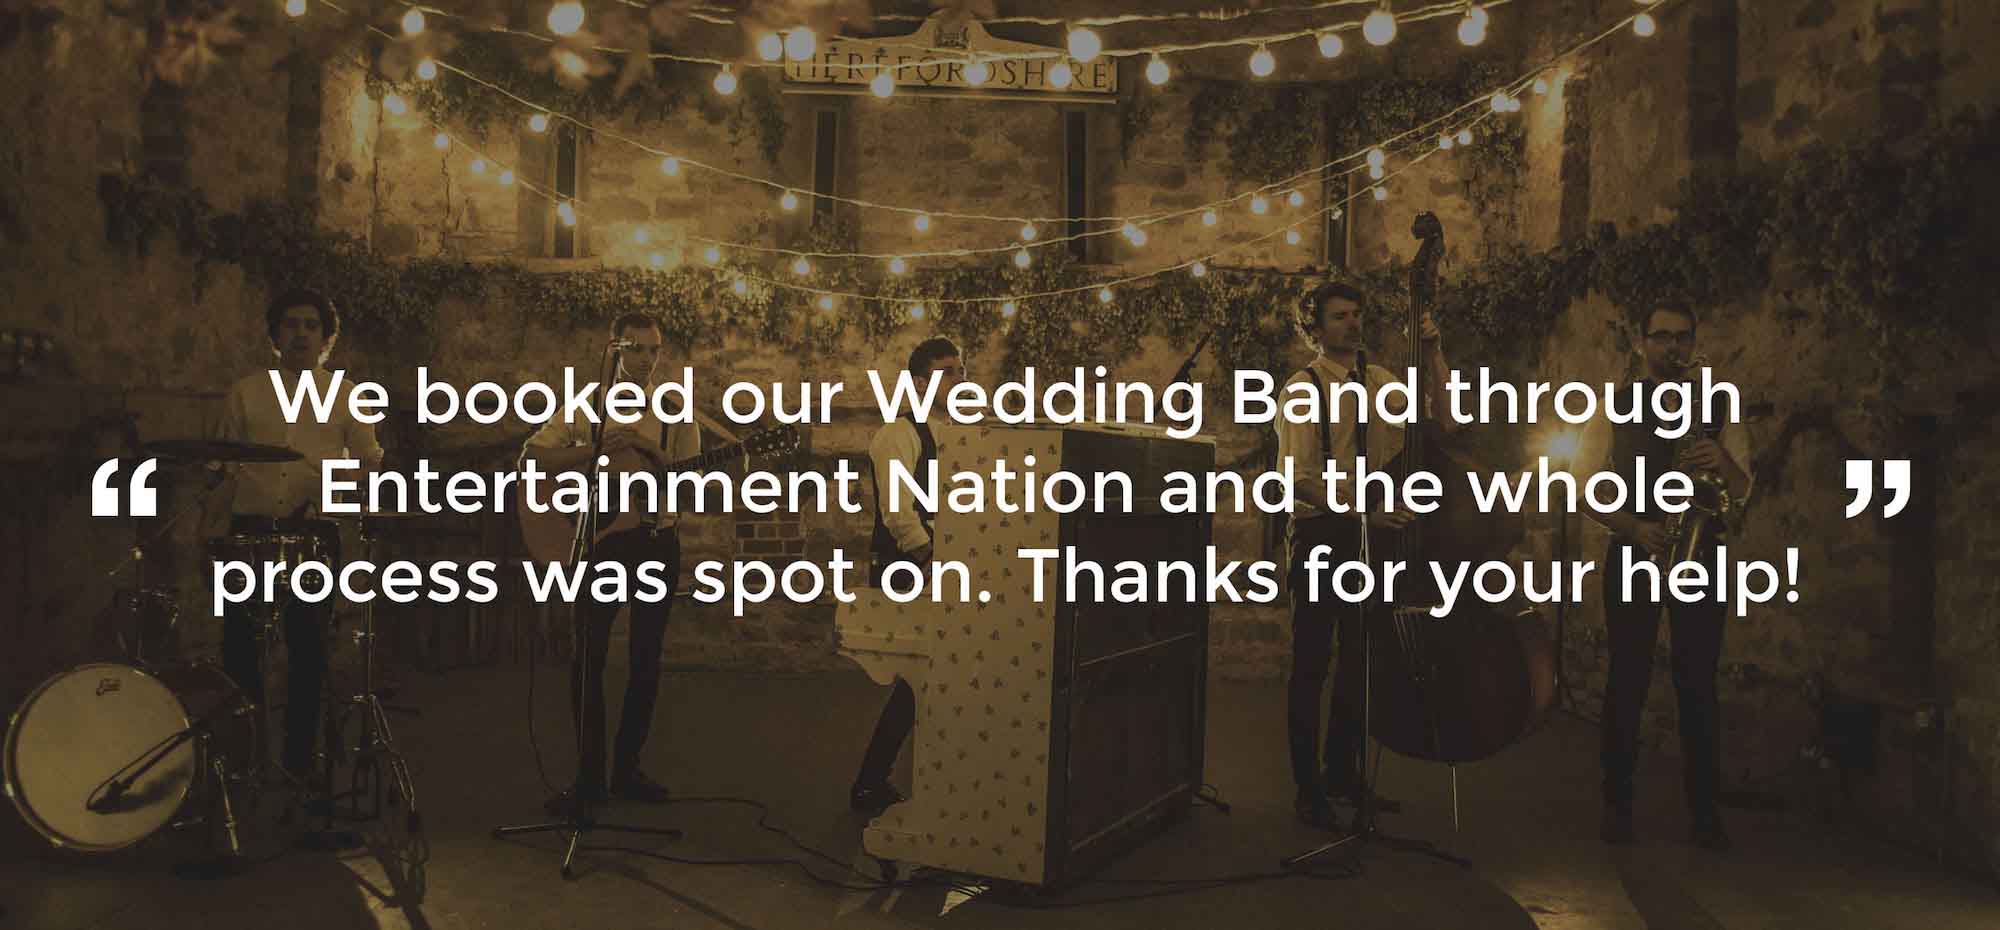 Client Review of a Wedding Band Devon